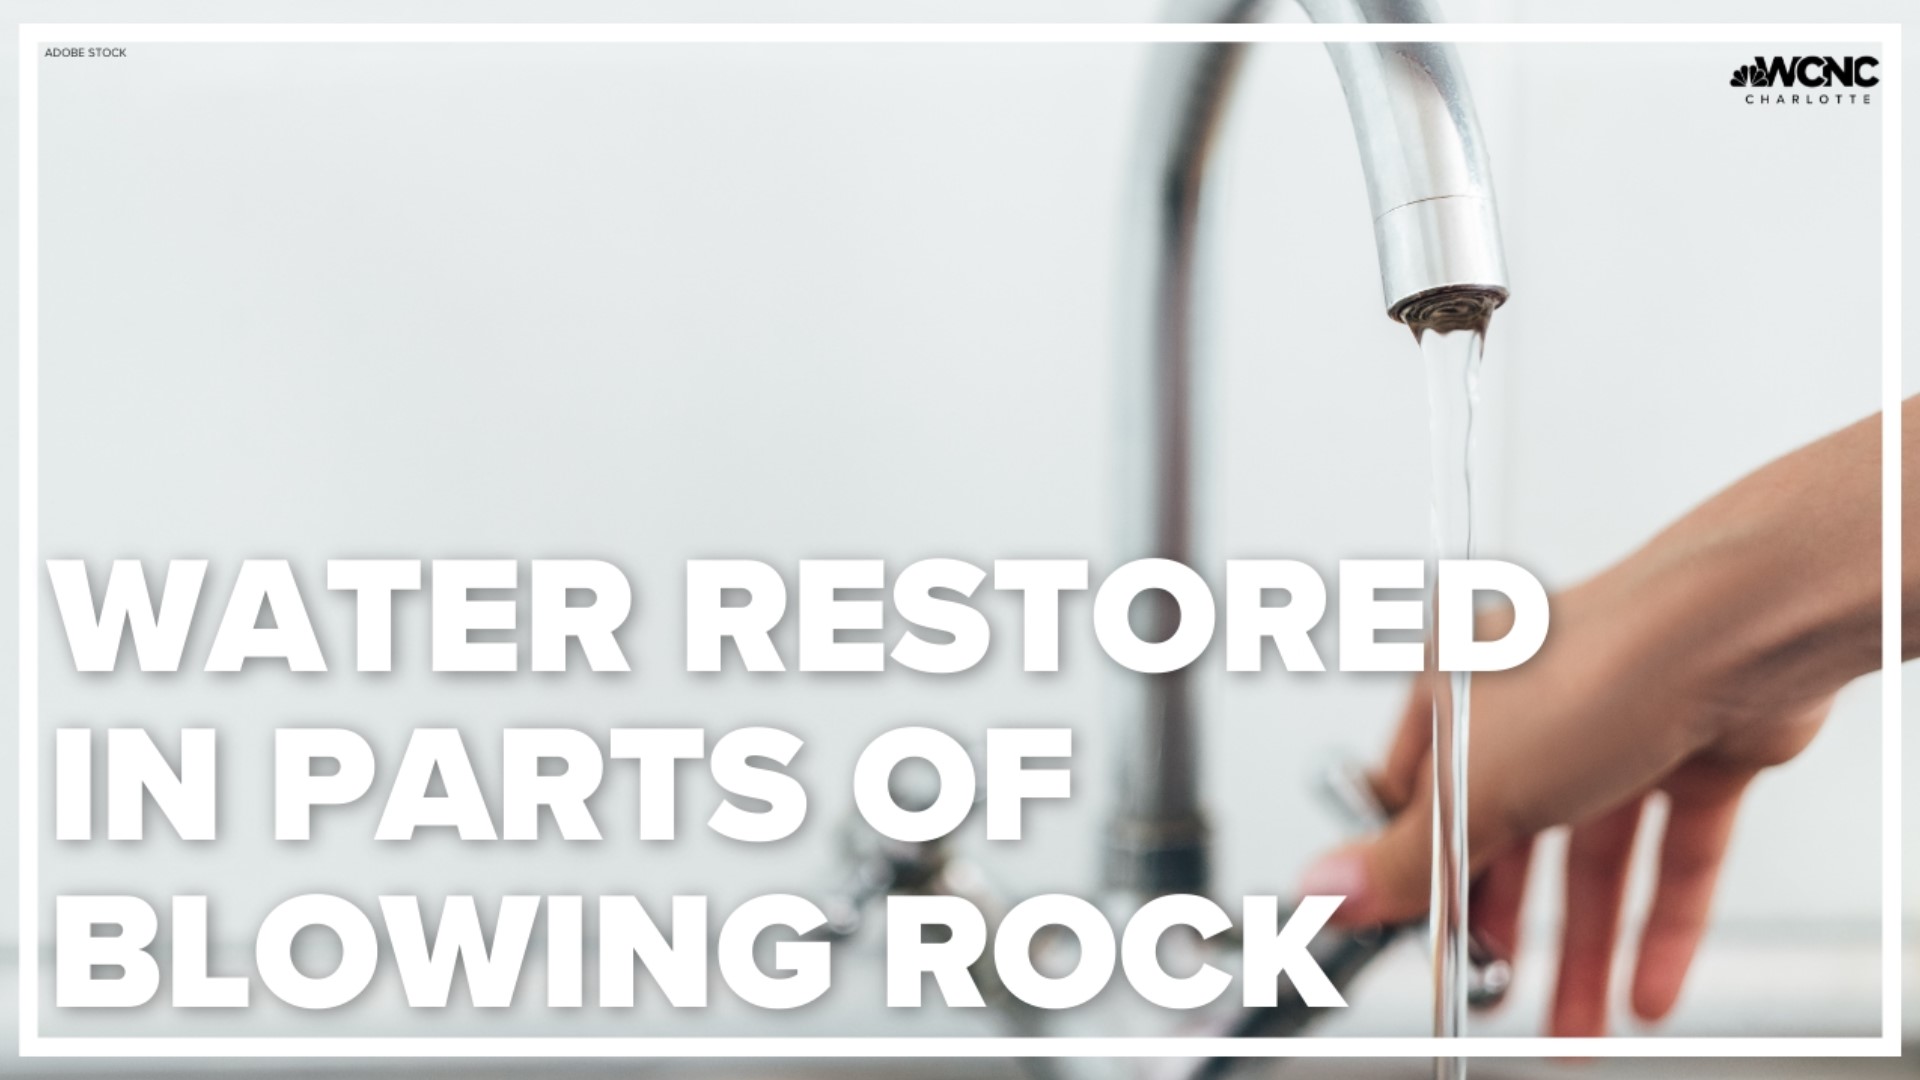 Crews in Blowing Rock found a major leak and are making repairs. Anyone who is getting water is being told to boil it until further notice.